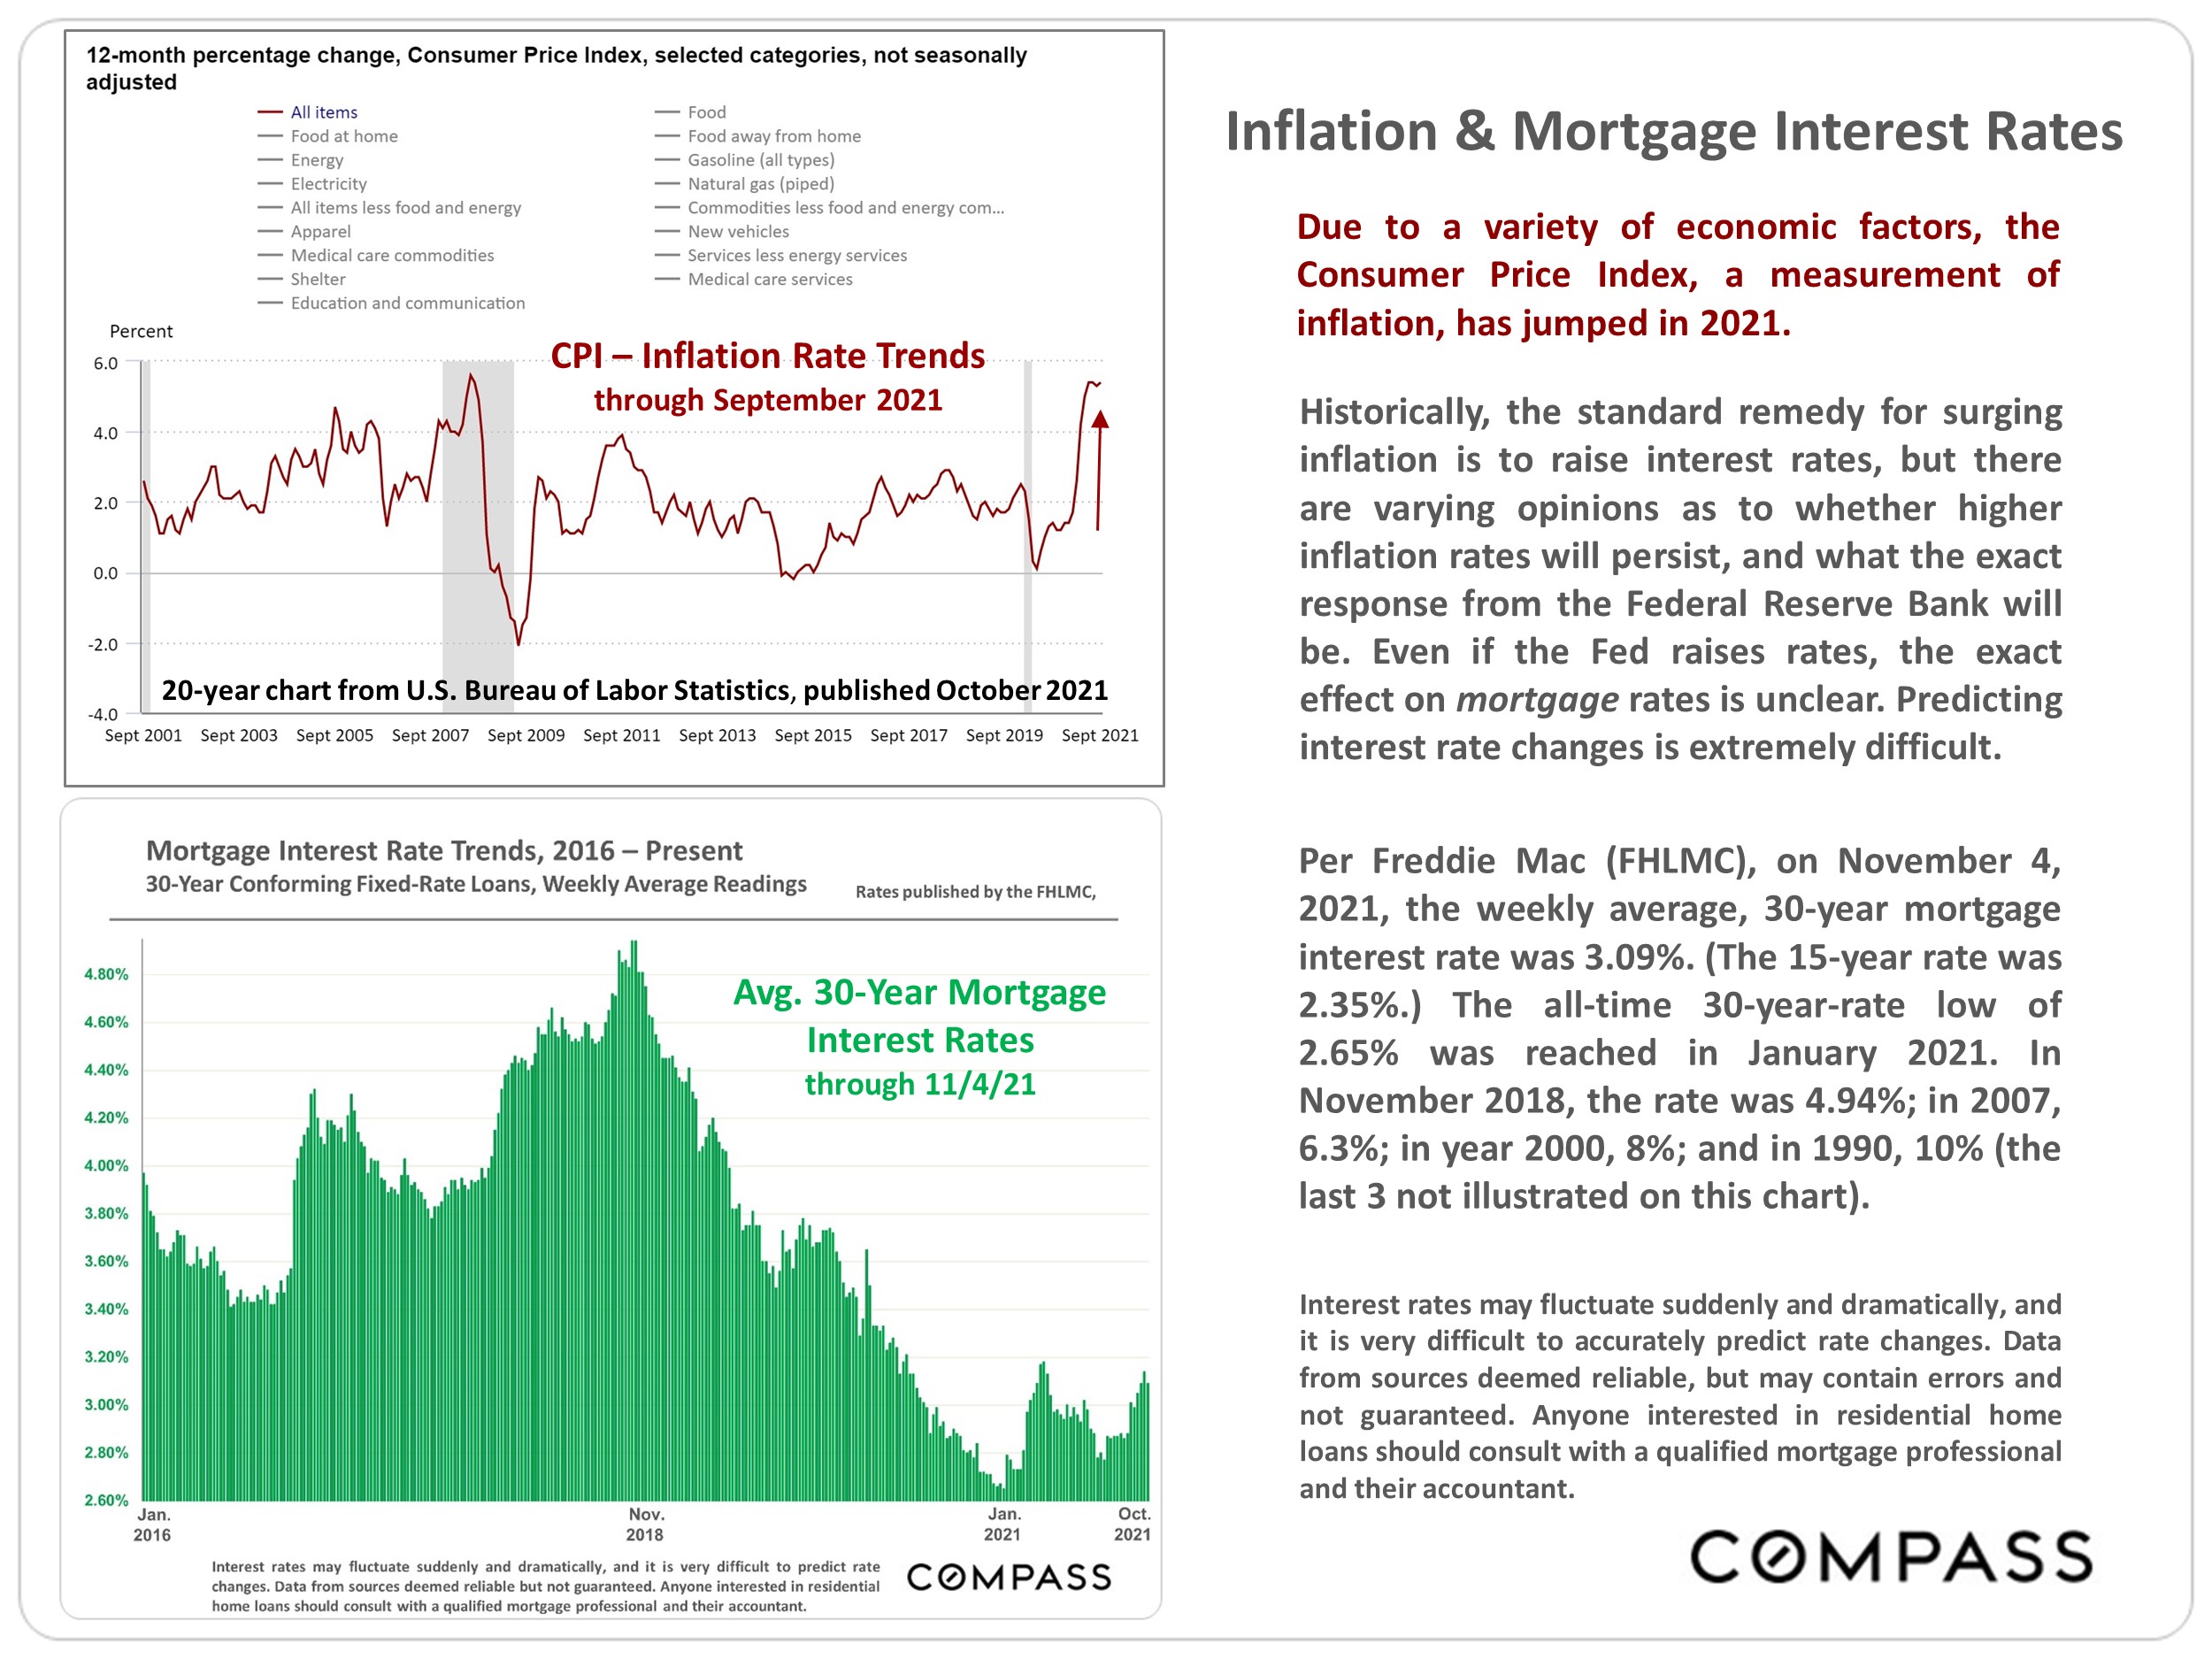 text about inflation & mortgage interest rates, accompanied by a line graph showing the 12 month percentage change of the consumer price index and a bar graph showing mortgage interest rate trends